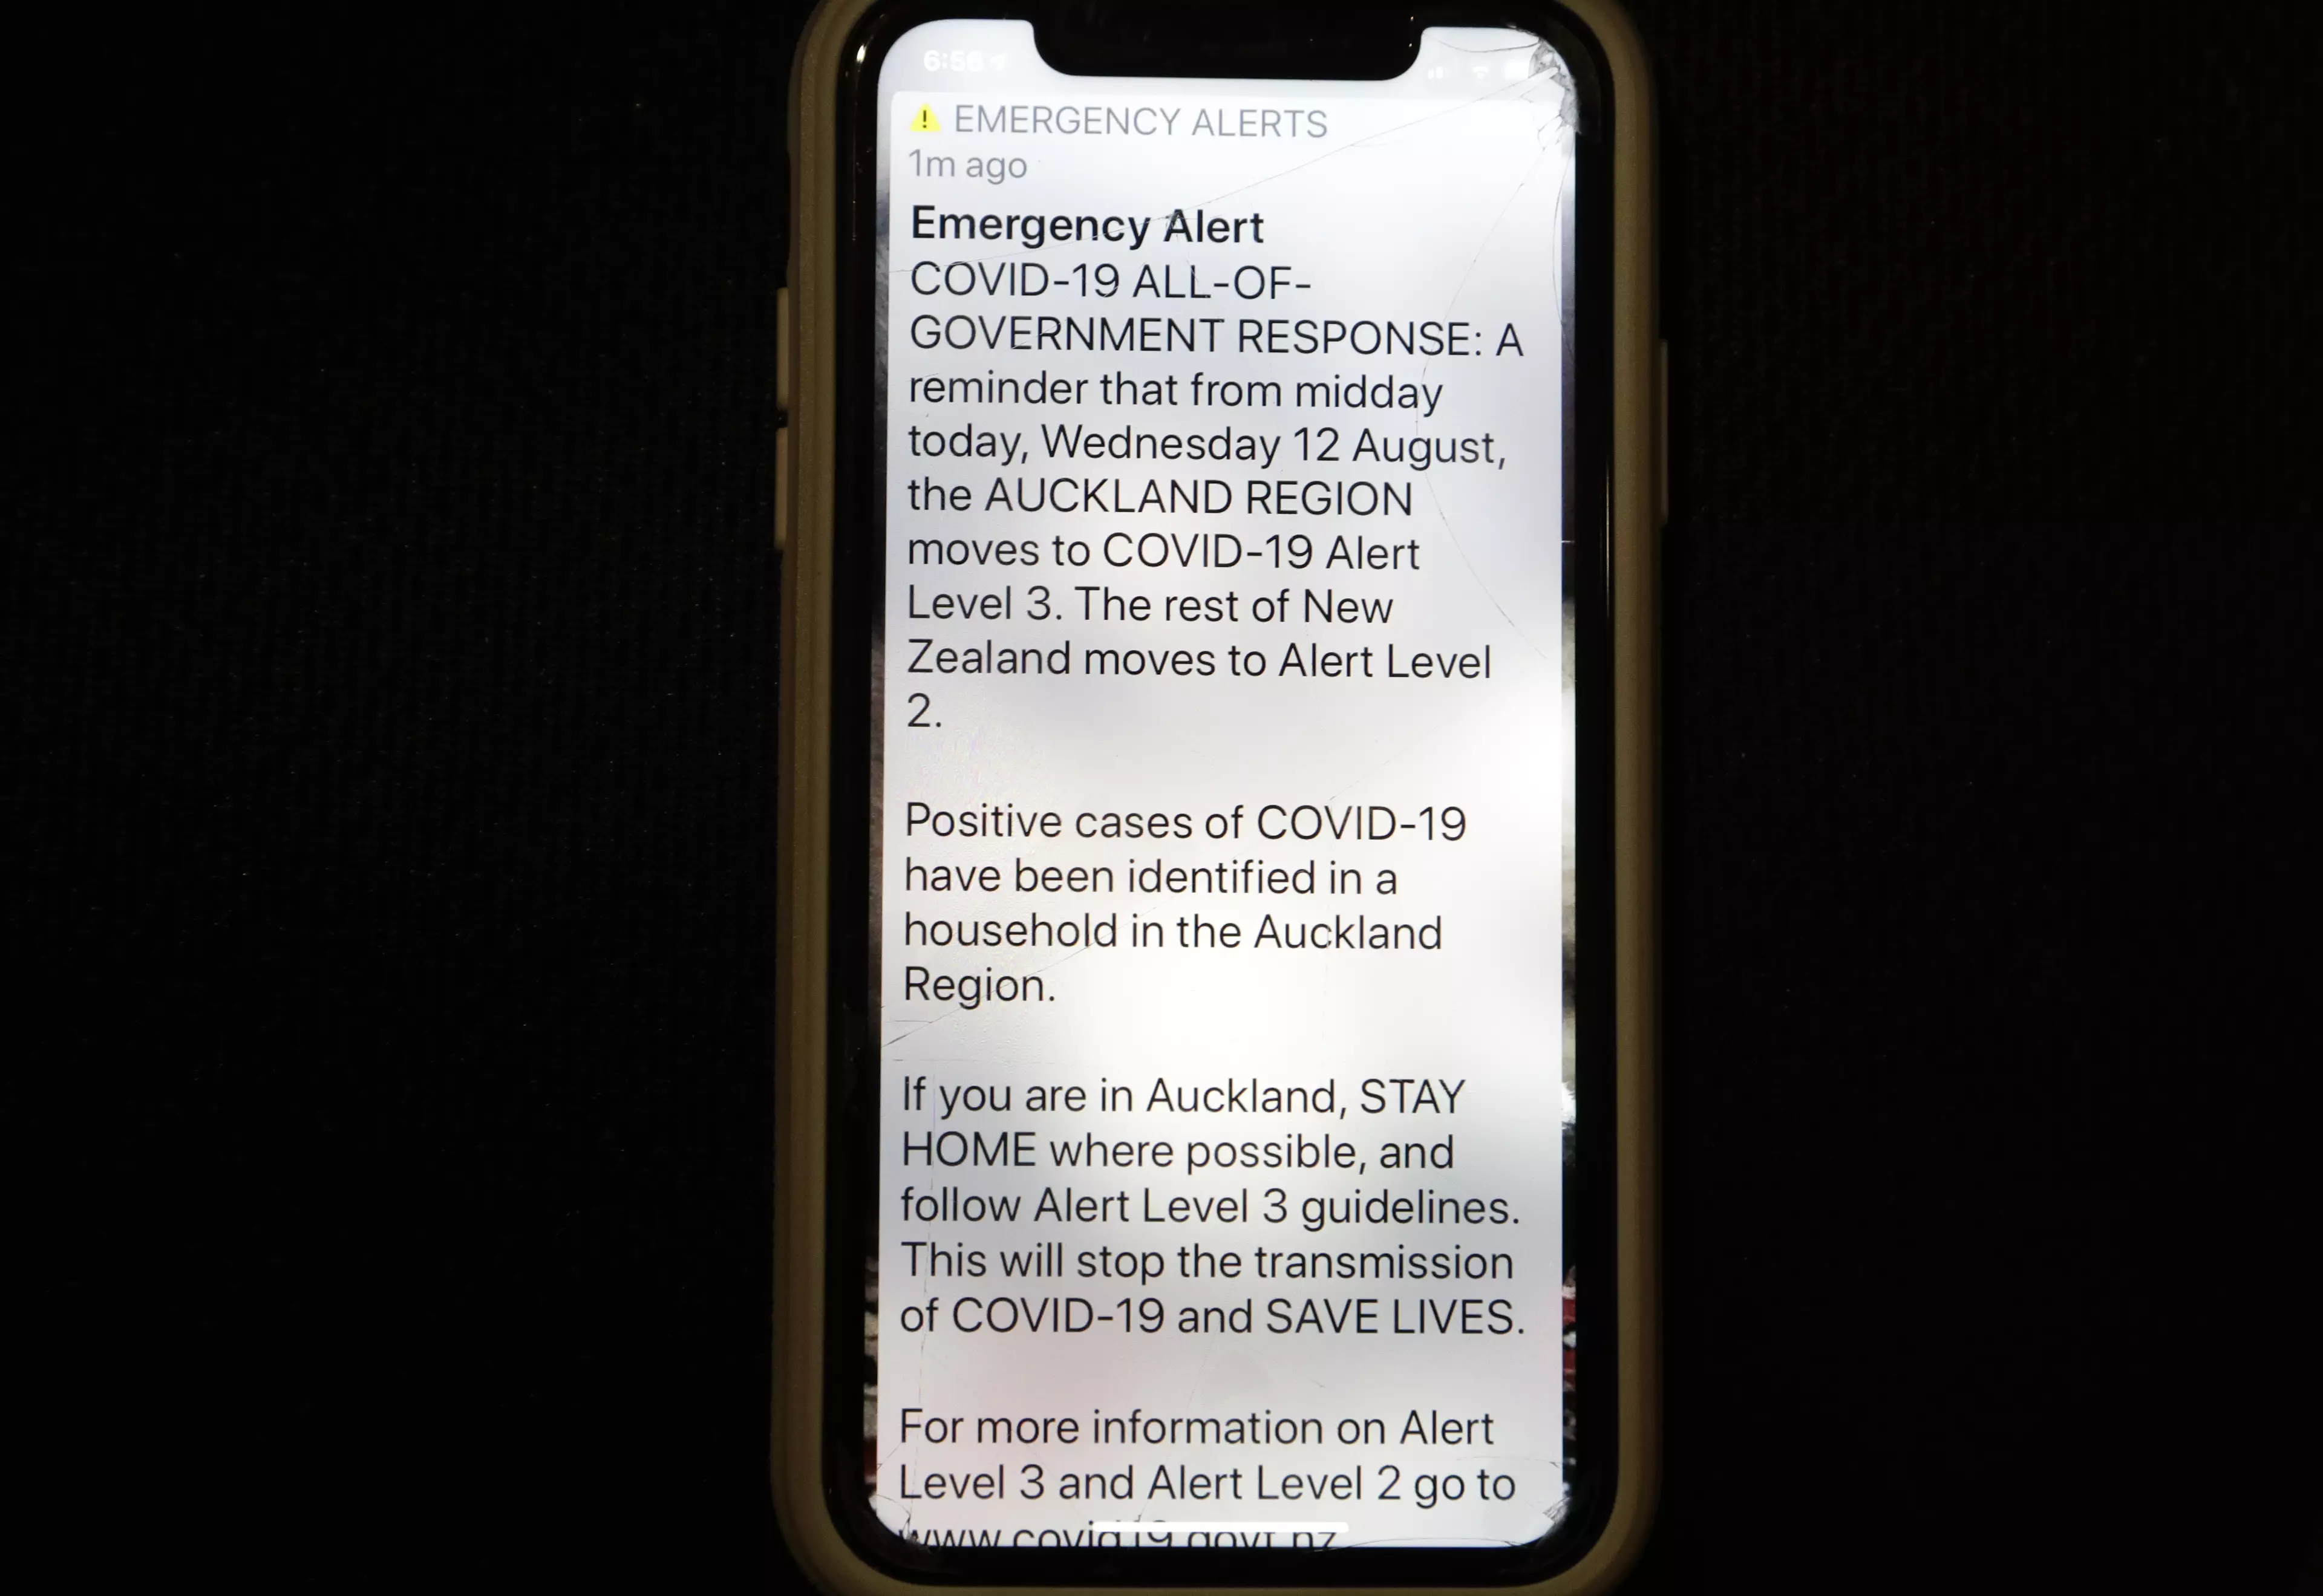 This is the alert Auckland residents received.